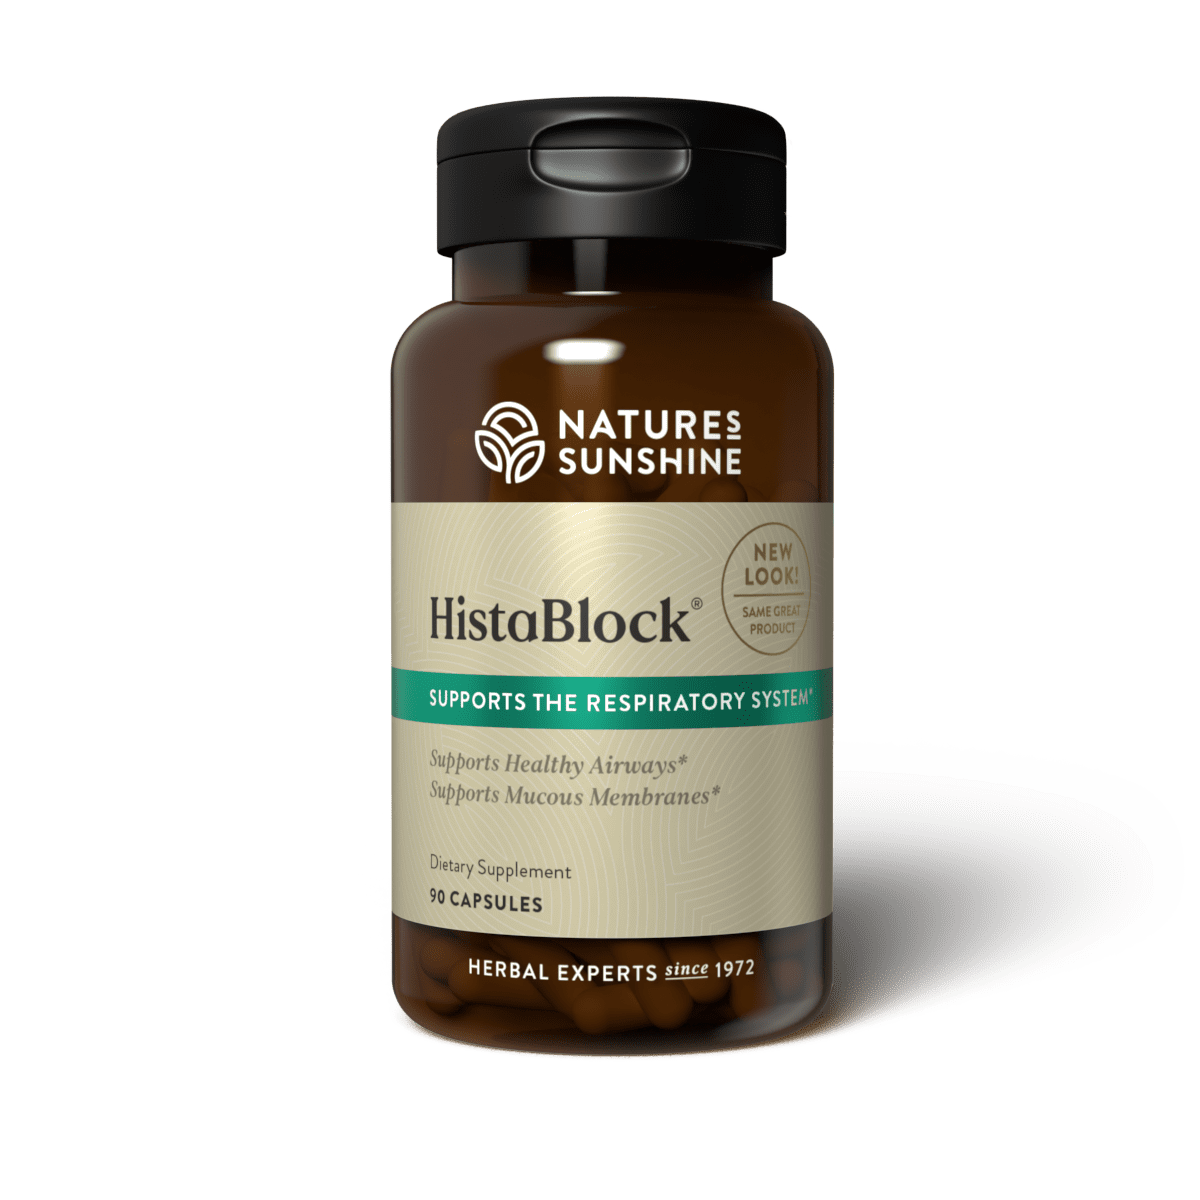 Don’t let seasonal irritants and pollutants interrupt your life. When pollen and dust start wreaking their havoc, try blocking them with HistaBlock! Nature’s Sunshine’s 